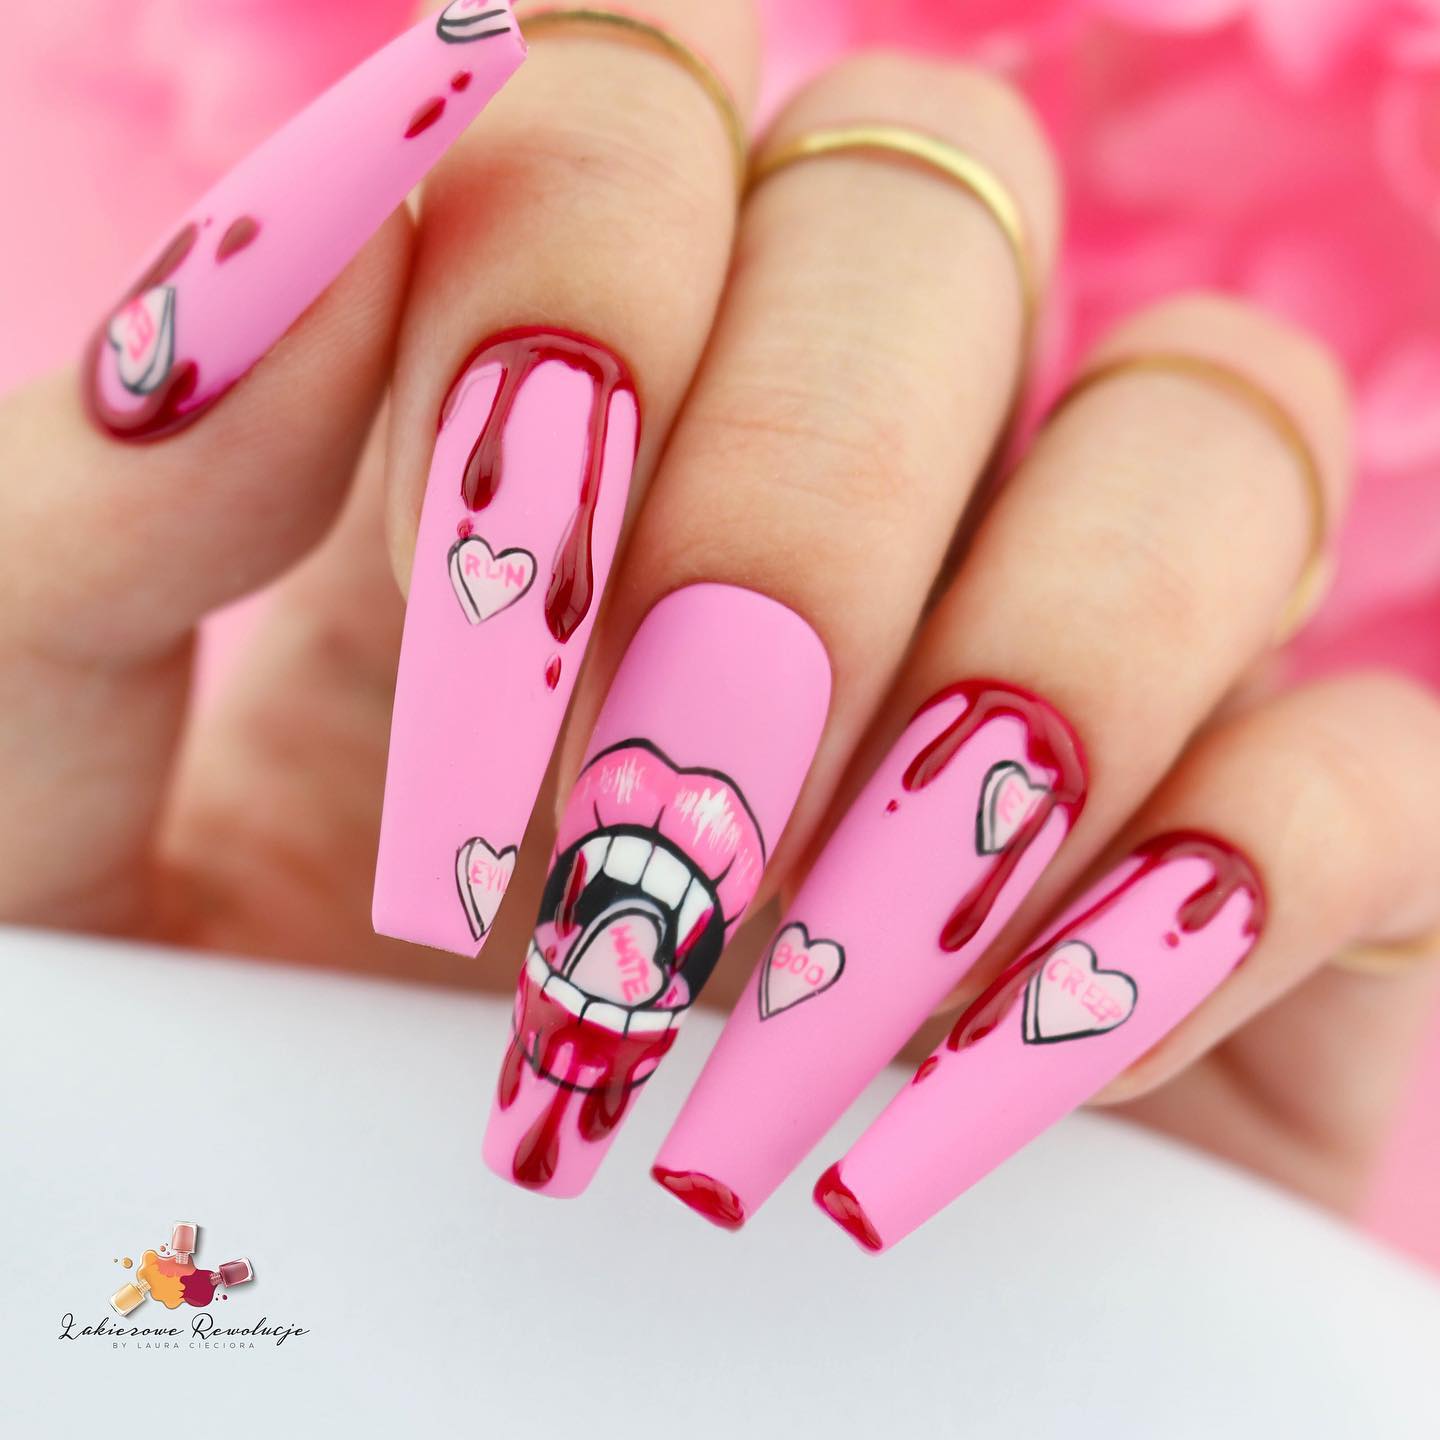 Slay Your Valentines Day With These Nail Art Designs - VIVA GLAM MAGAZINE™